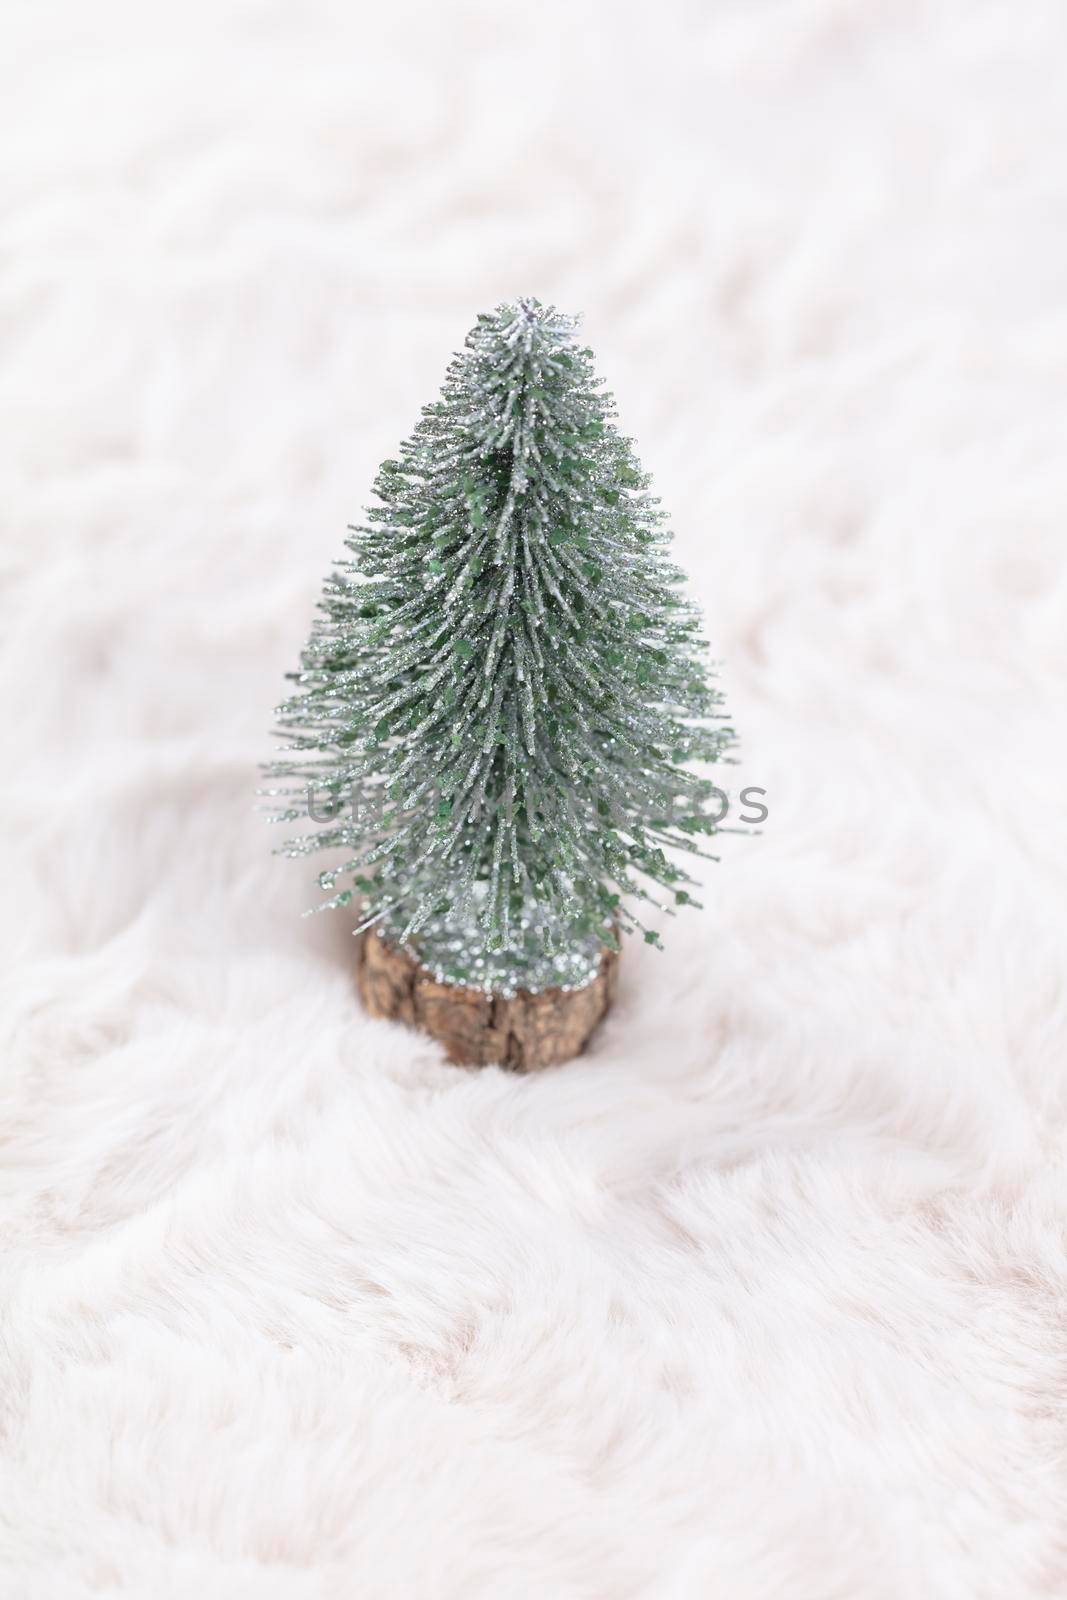 Christmas little trees and wool background by gitusik